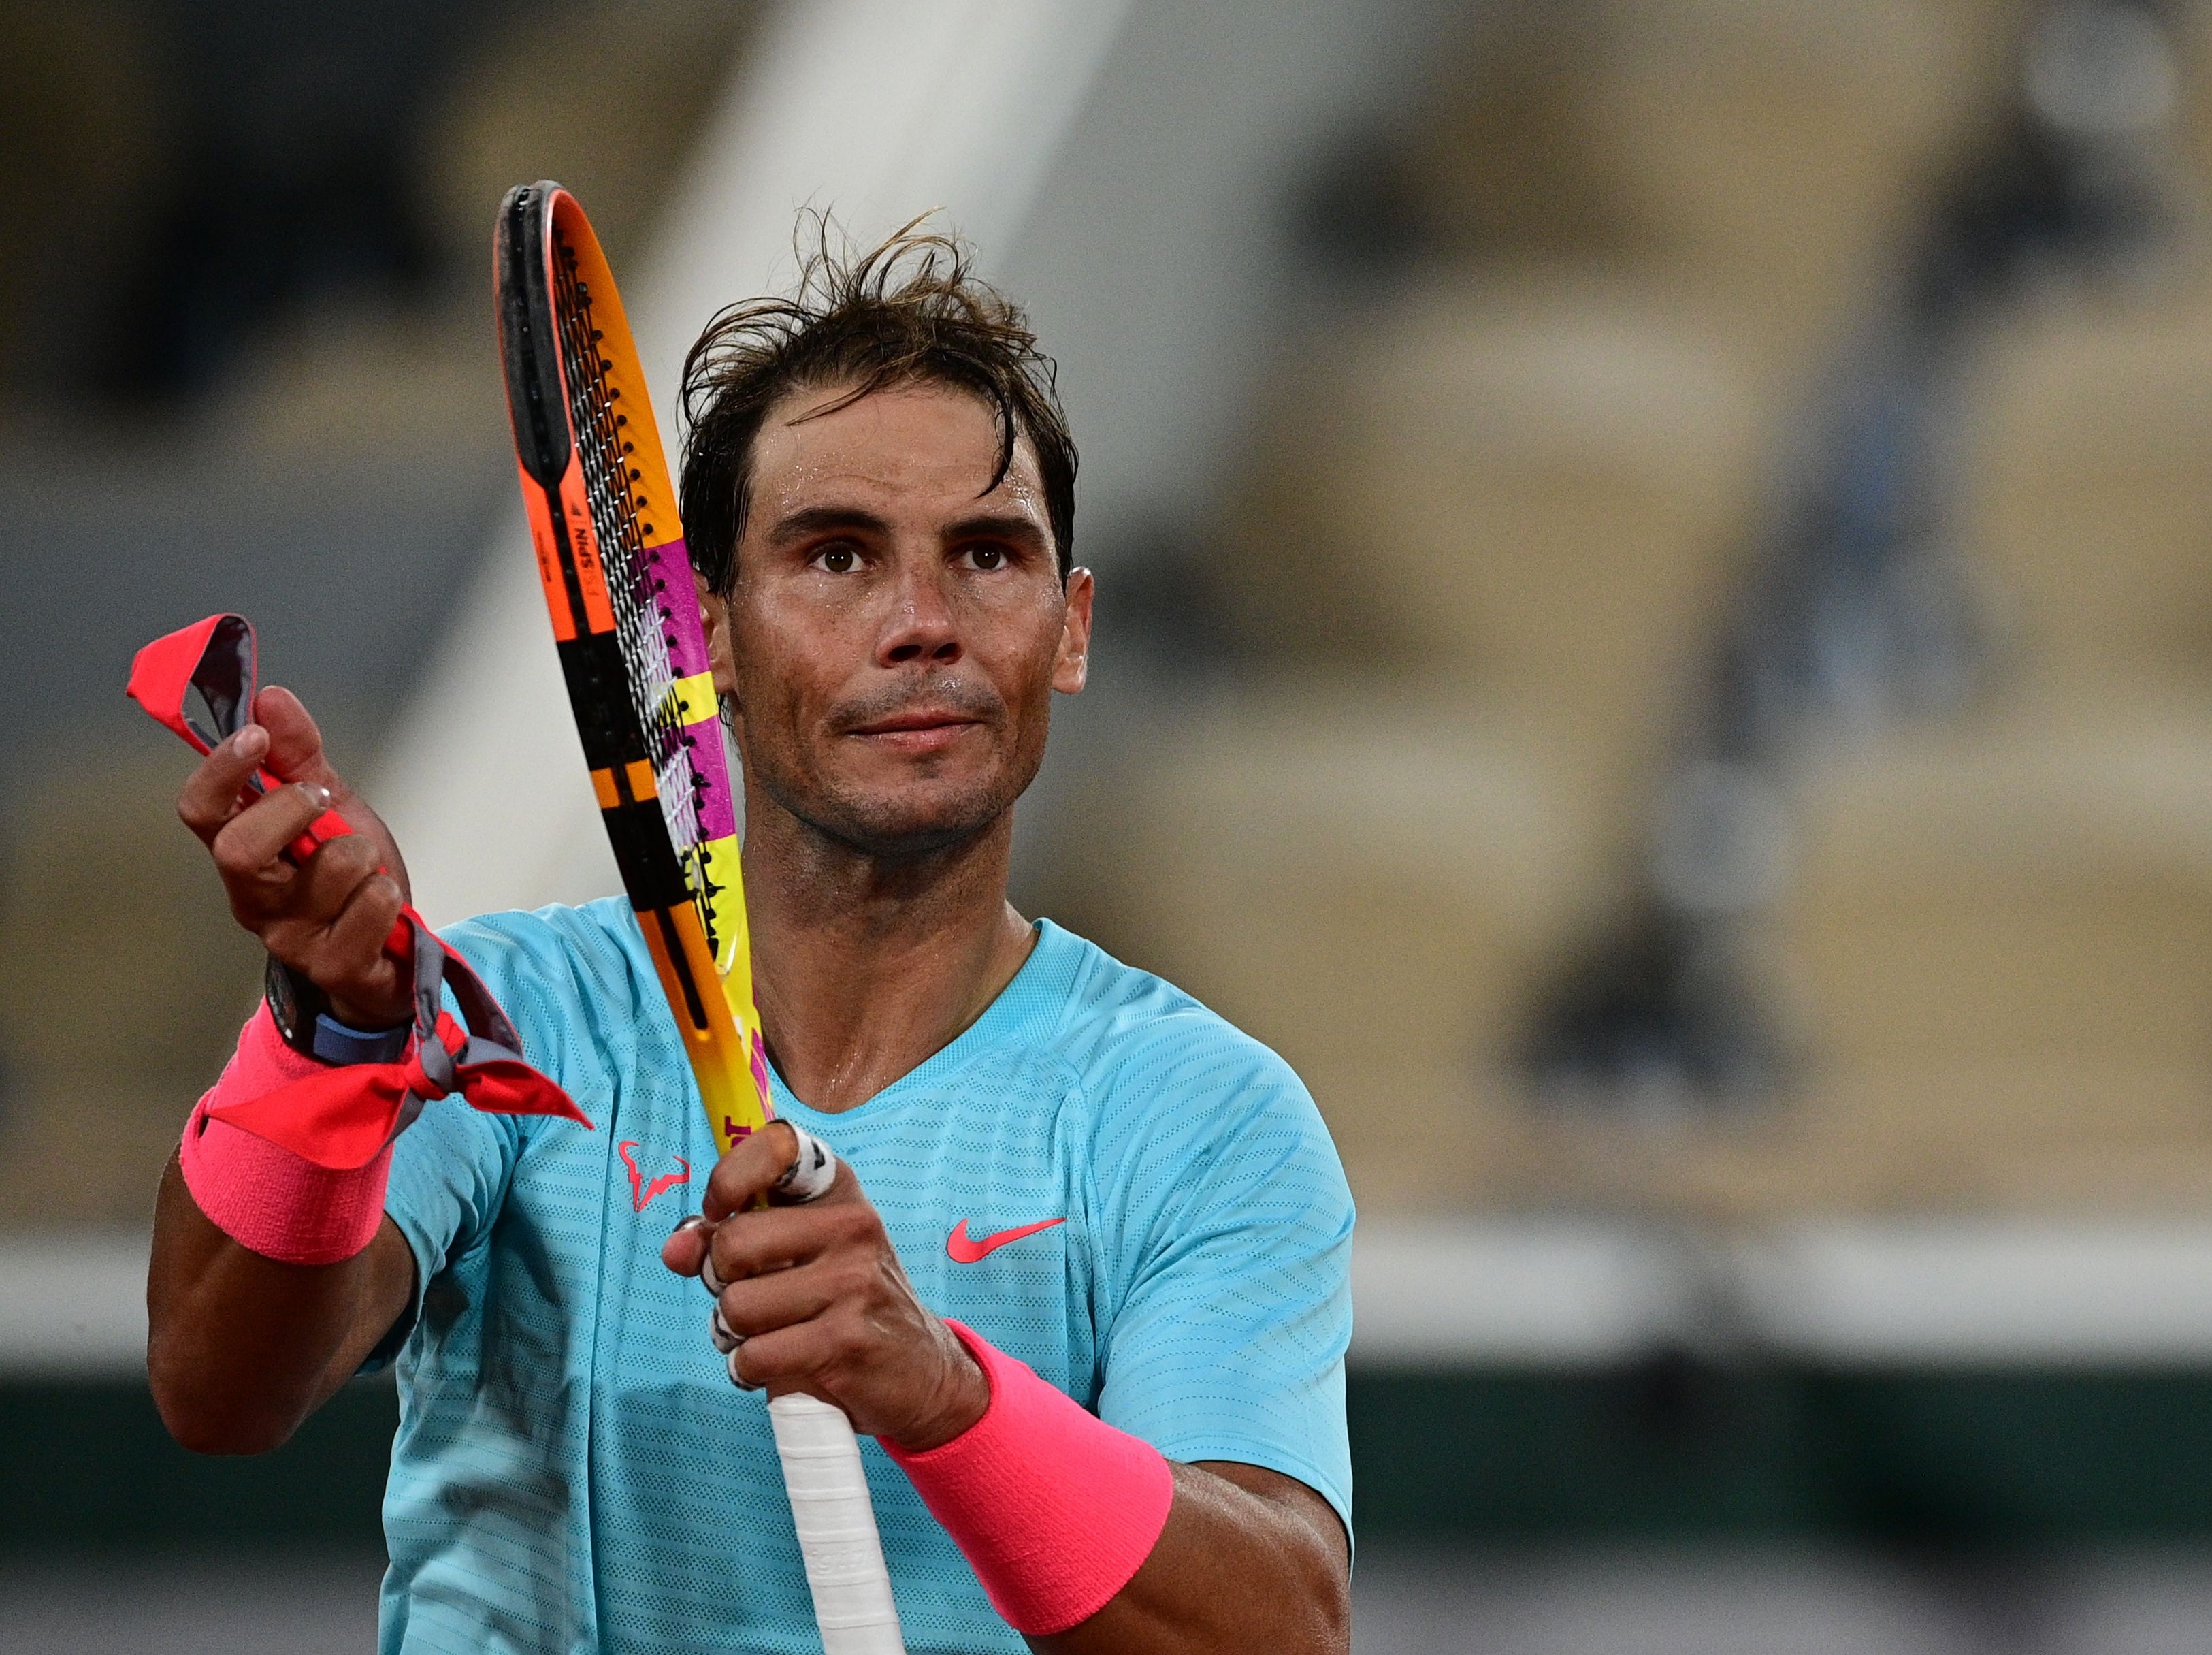 Rafael Nadal is bidding for a record-extending 13th French Open crown